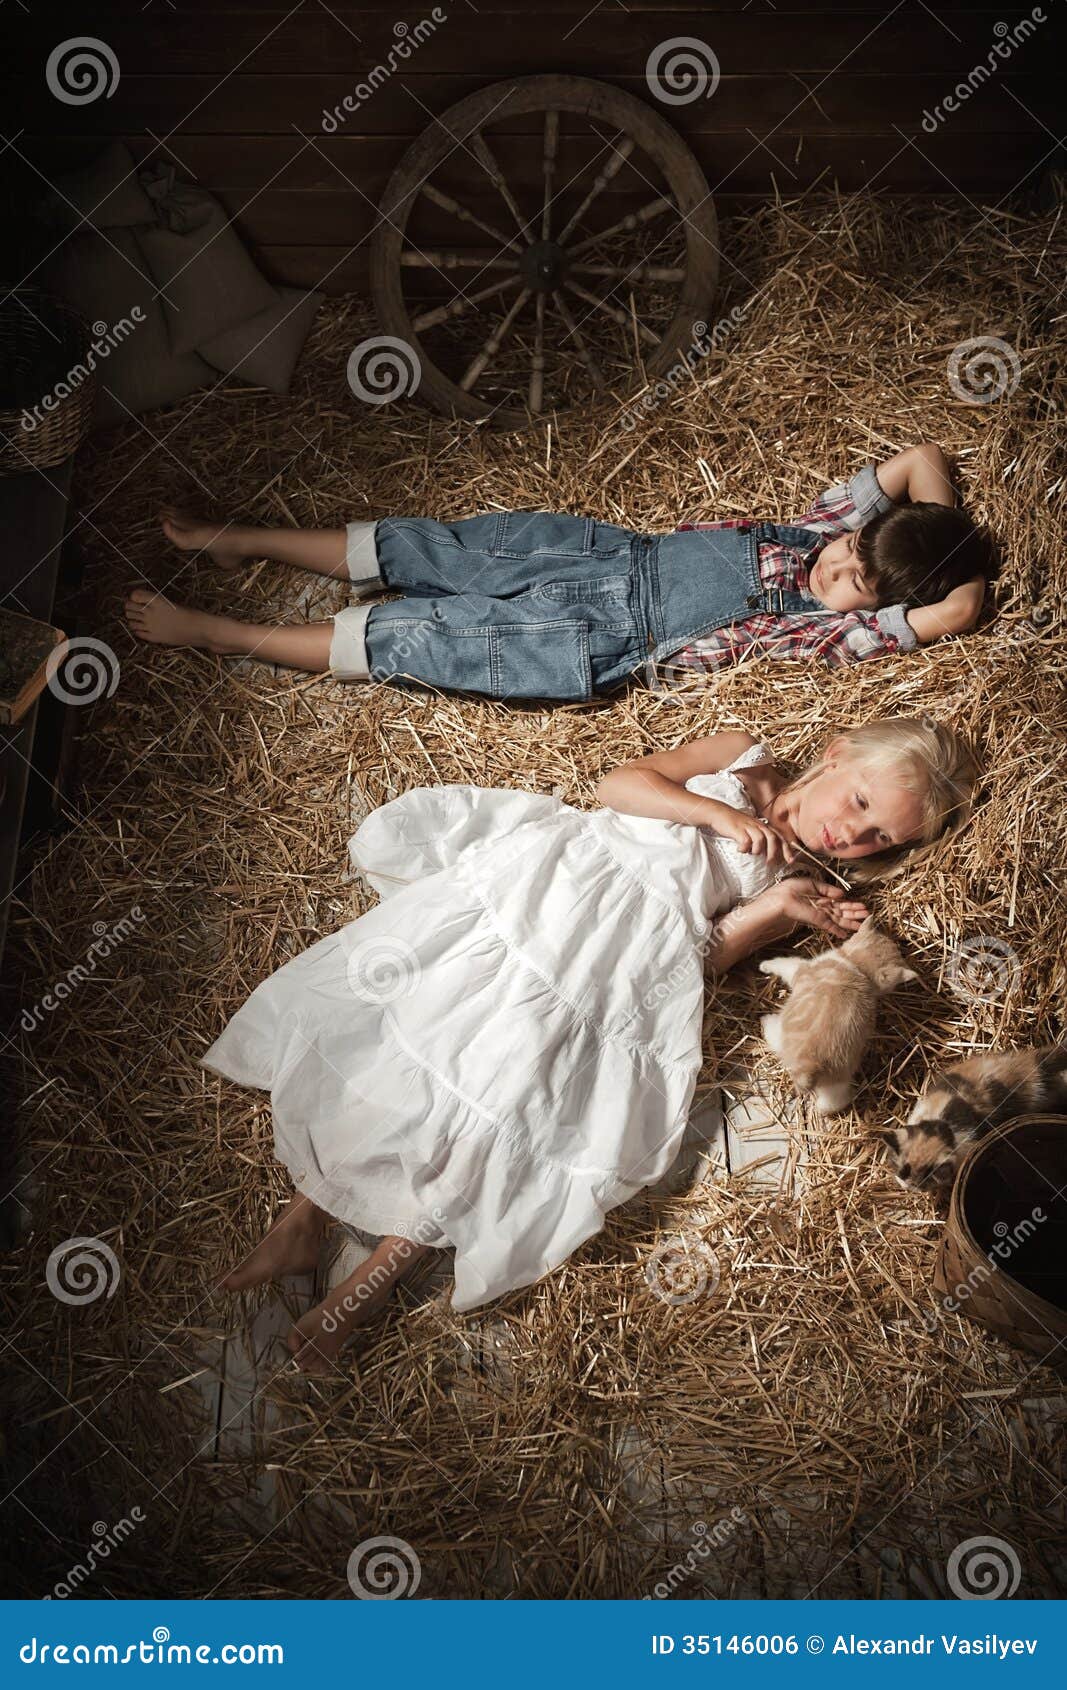 children in the hay in the barn with a kitten royalty free